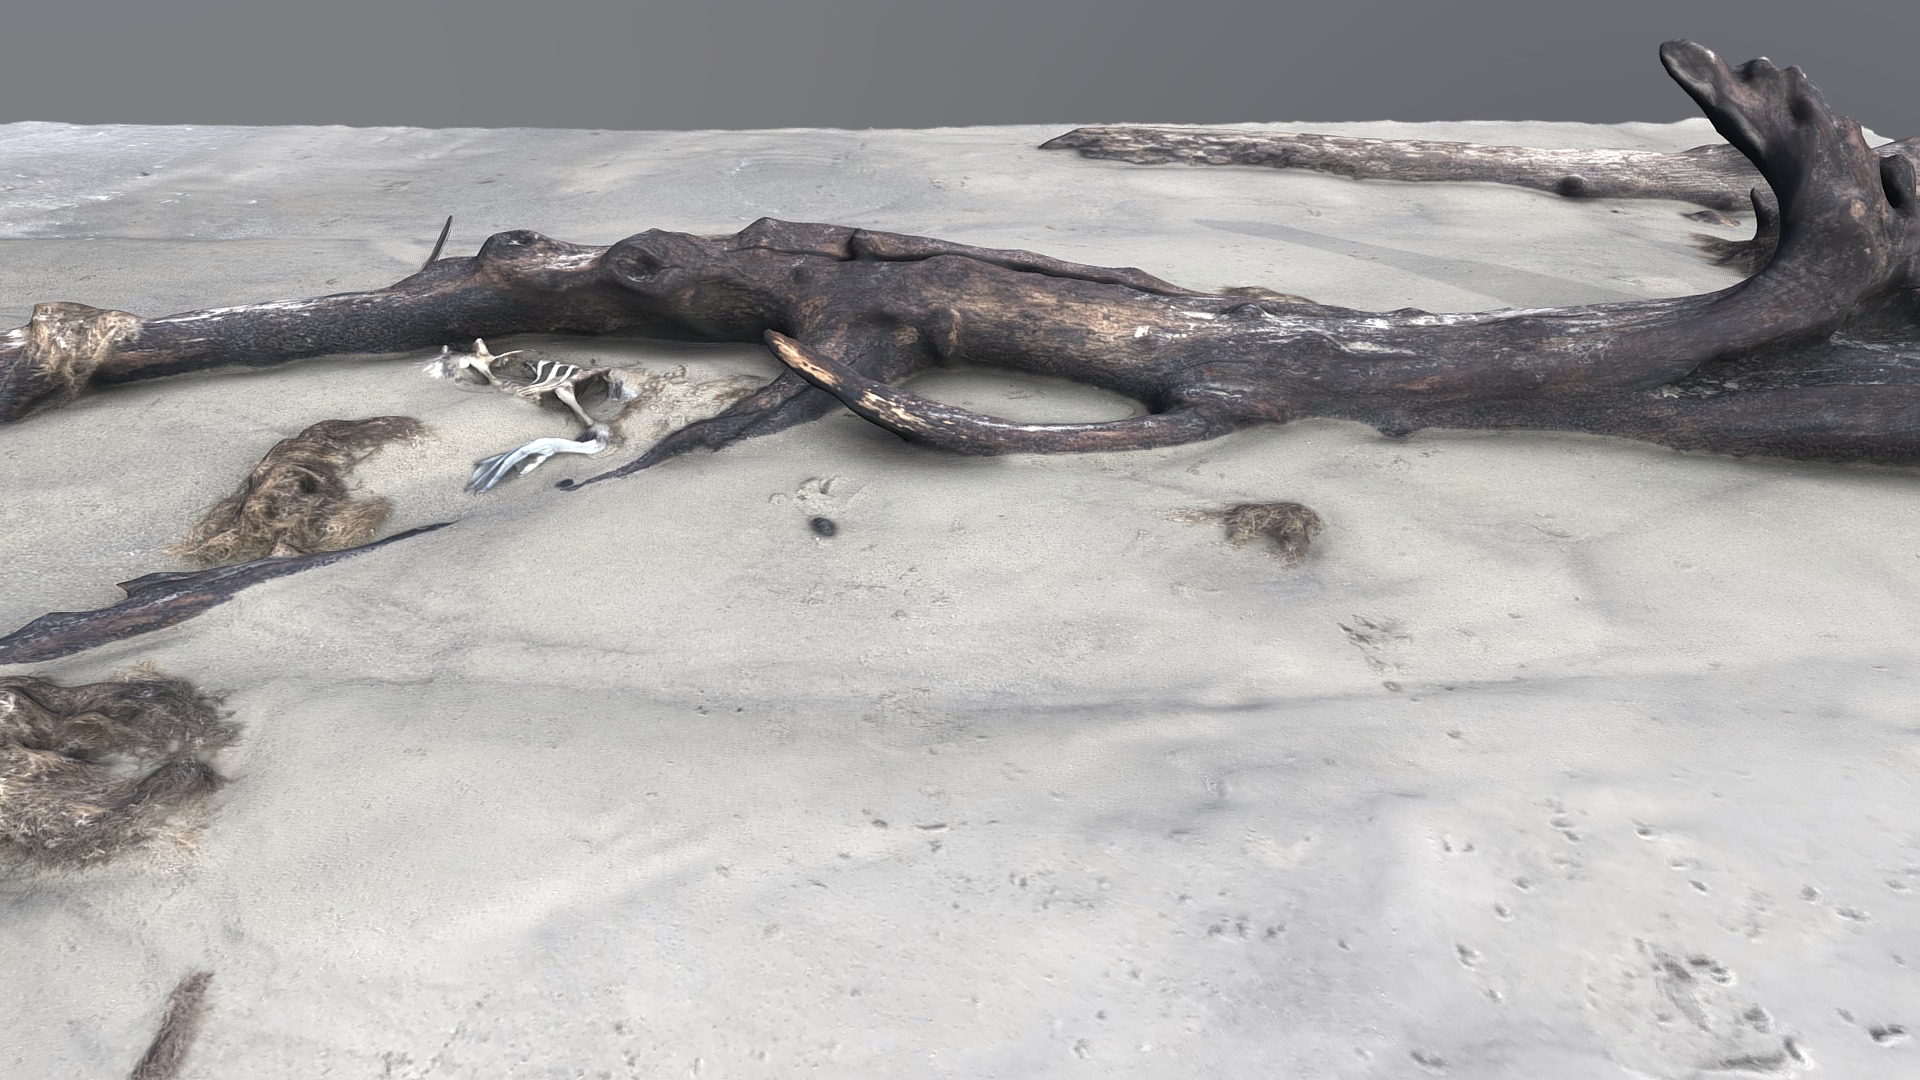 3D model Driftwood 03 (photogrammetry scan) - This is a 3D model of the Driftwood 03 (photogrammetry scan). The 3D model is about a group of snakes on a sandy surface.